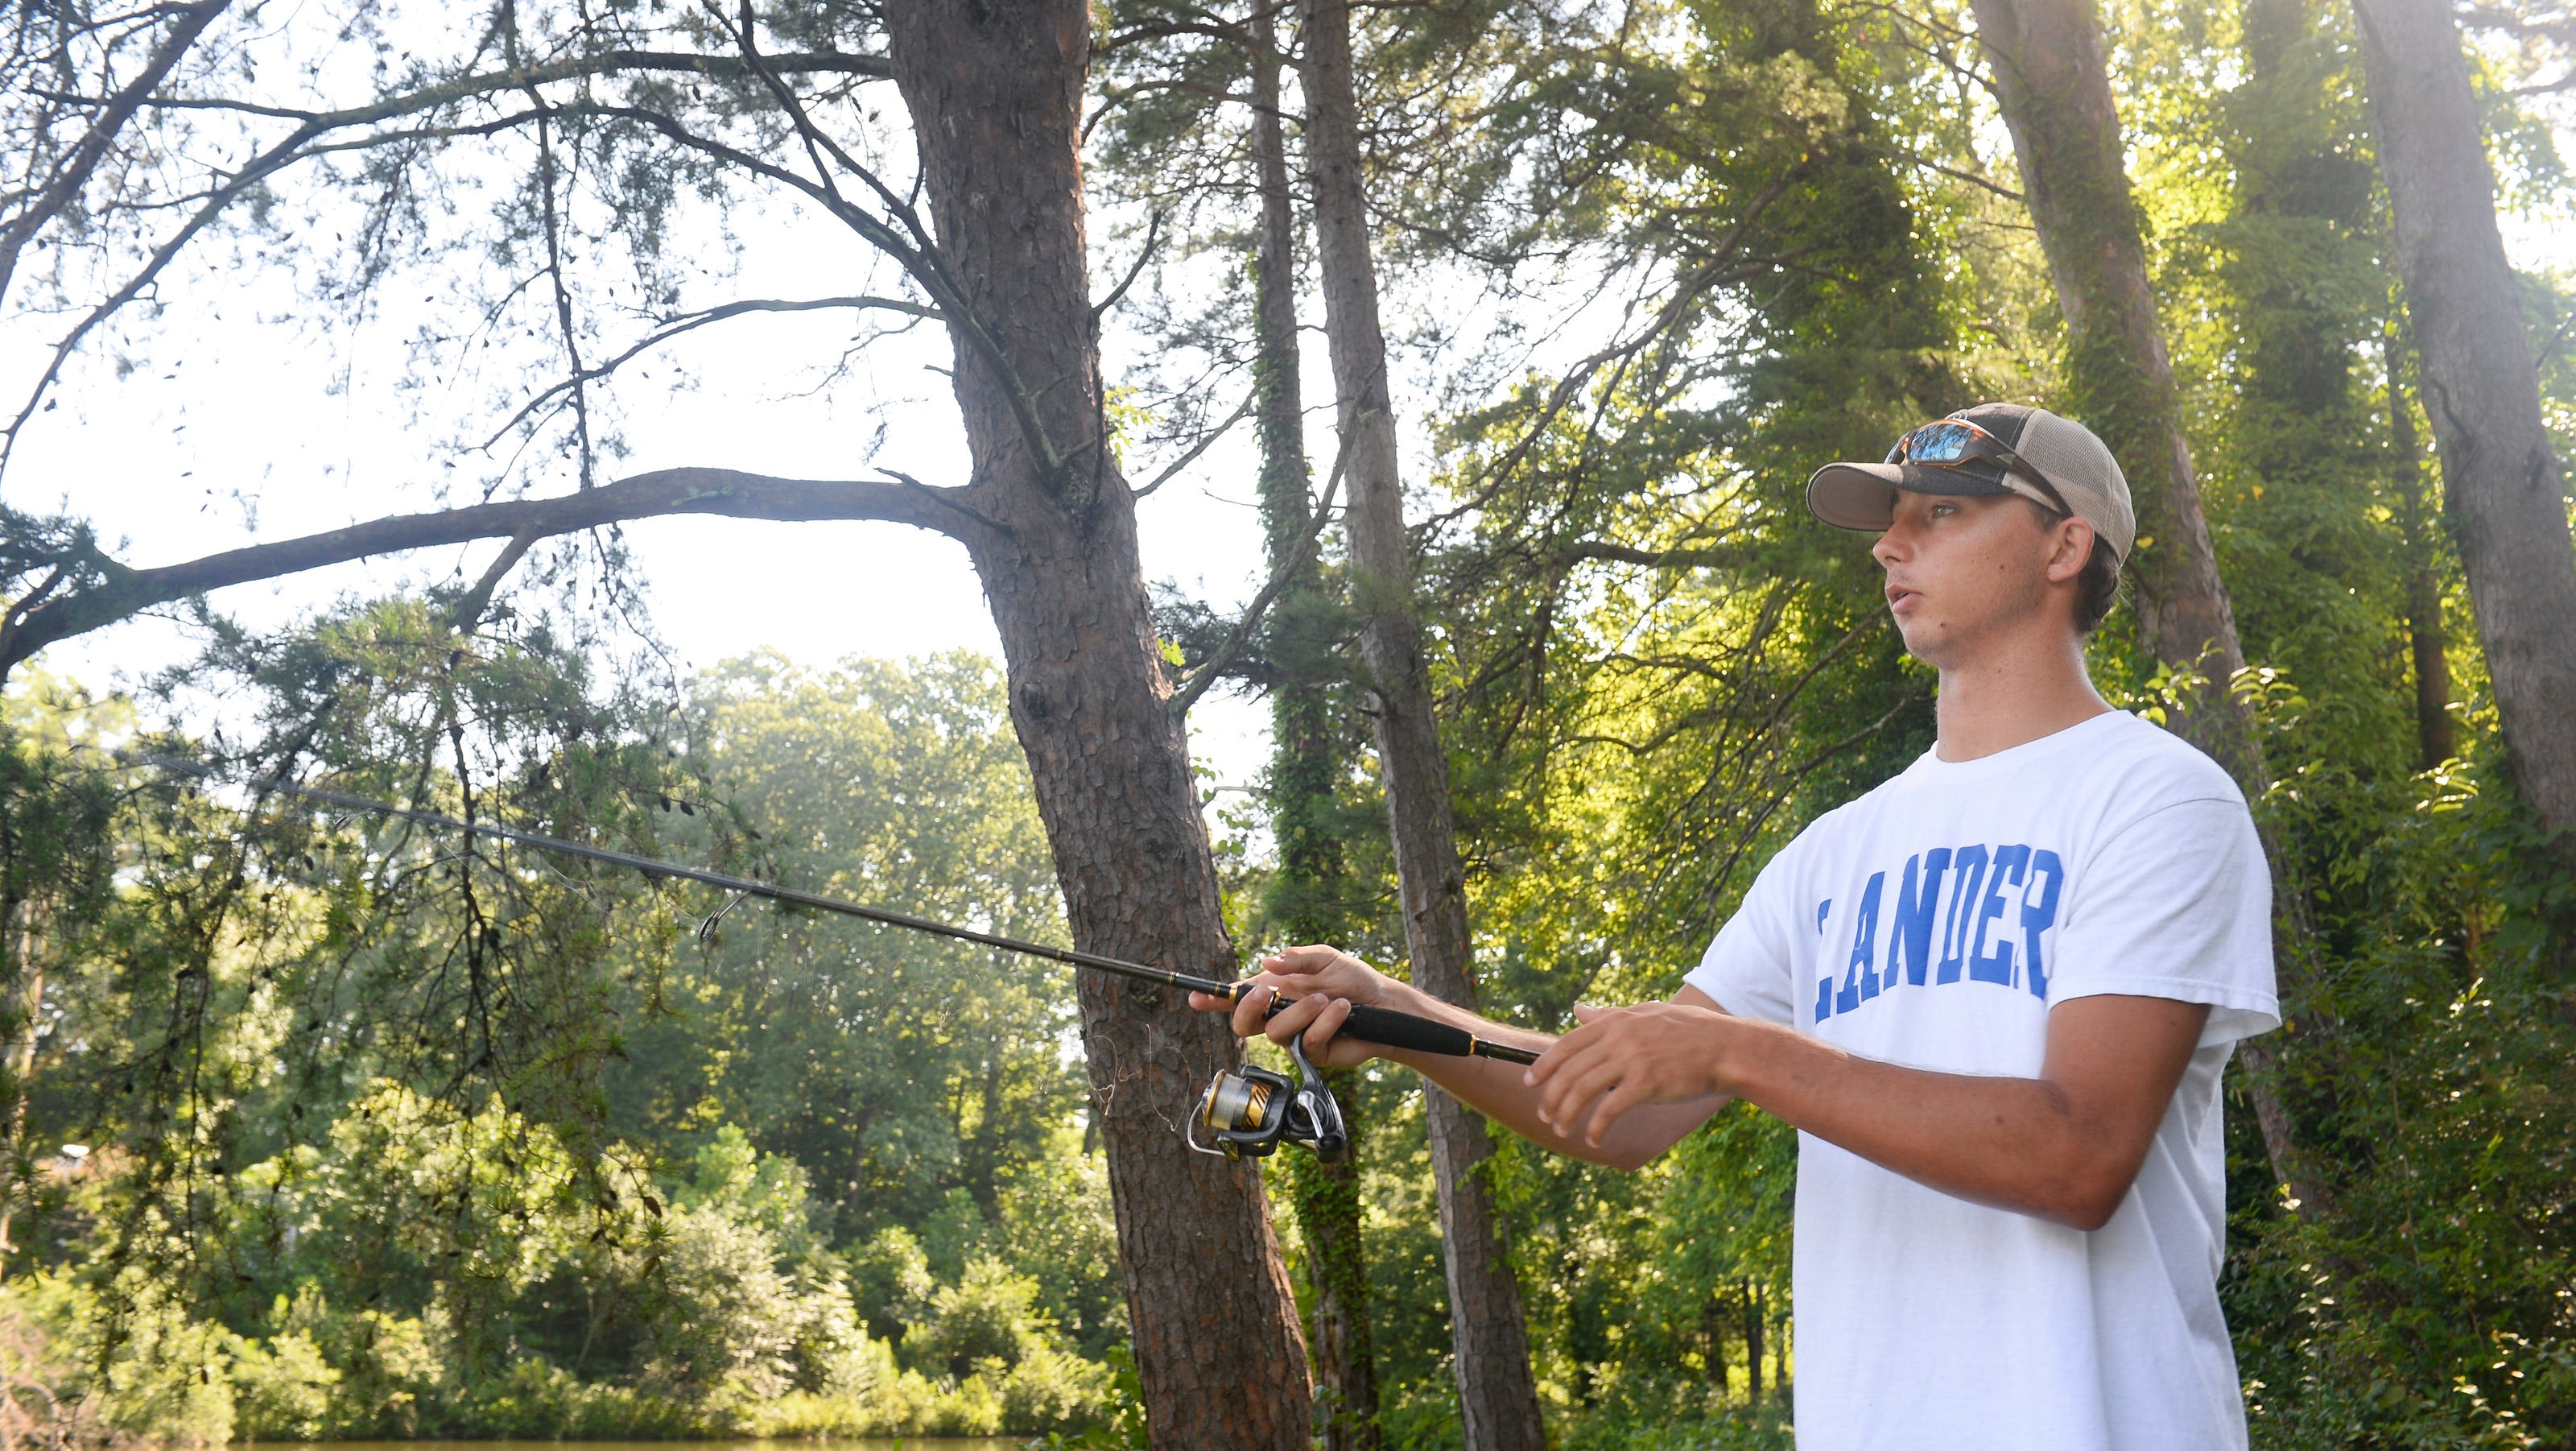 VIDEO: Duncan Park in Spartanburg opens for fishing